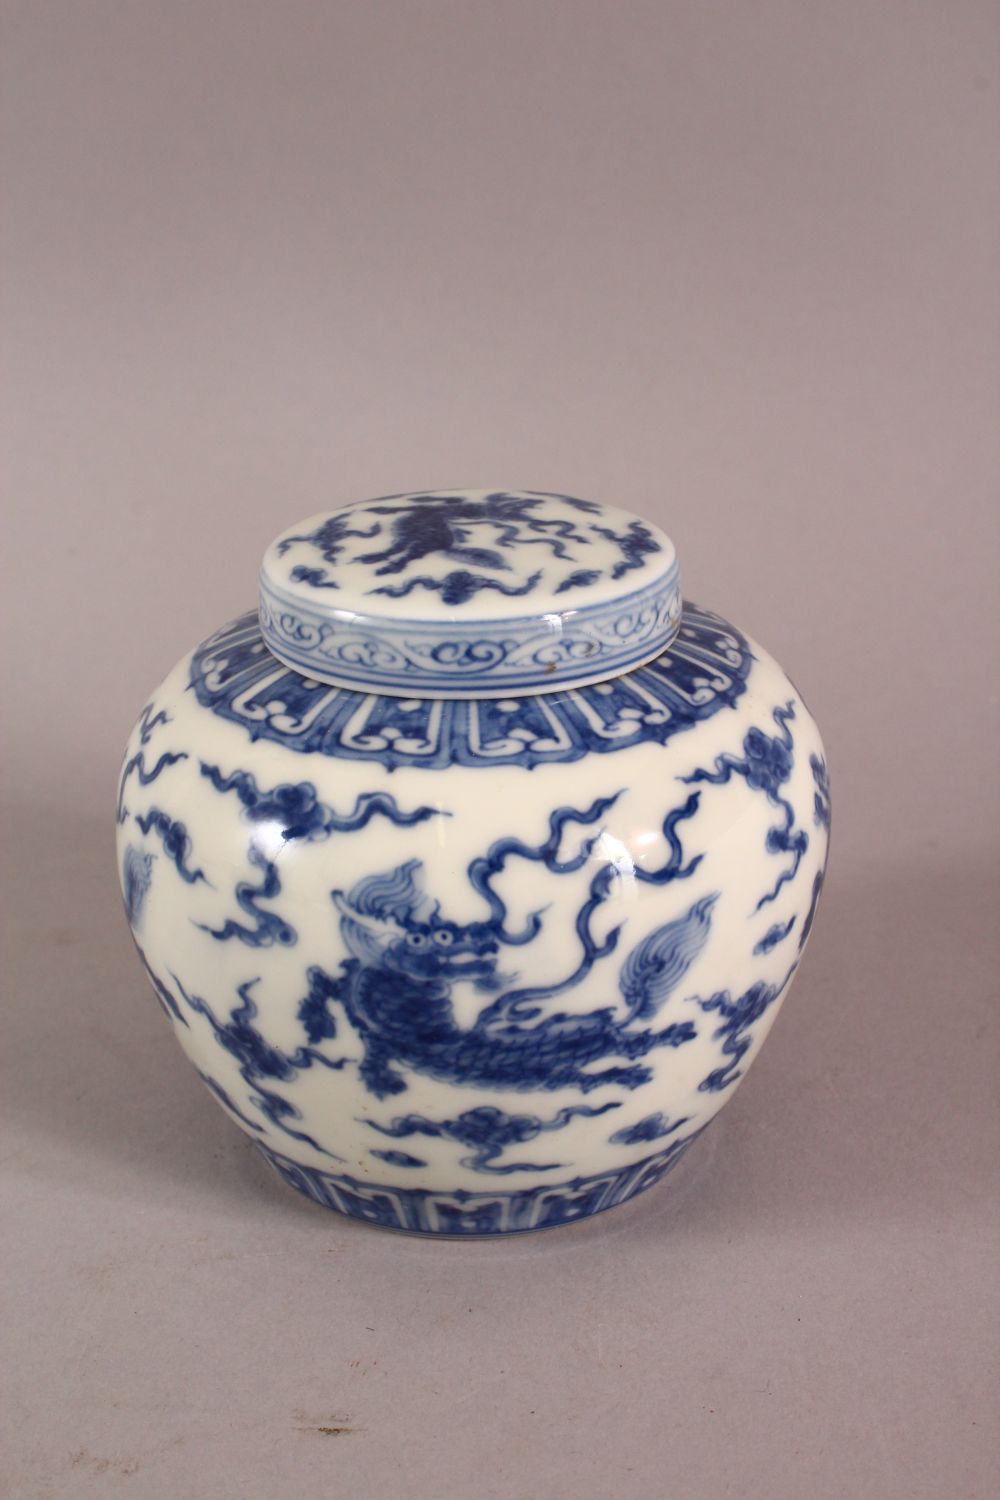 A CHINESE BLUE & WHITE PORCELAIN JAR & COVER, with decoration of kylin and clouds, base with a mark, - Image 4 of 7